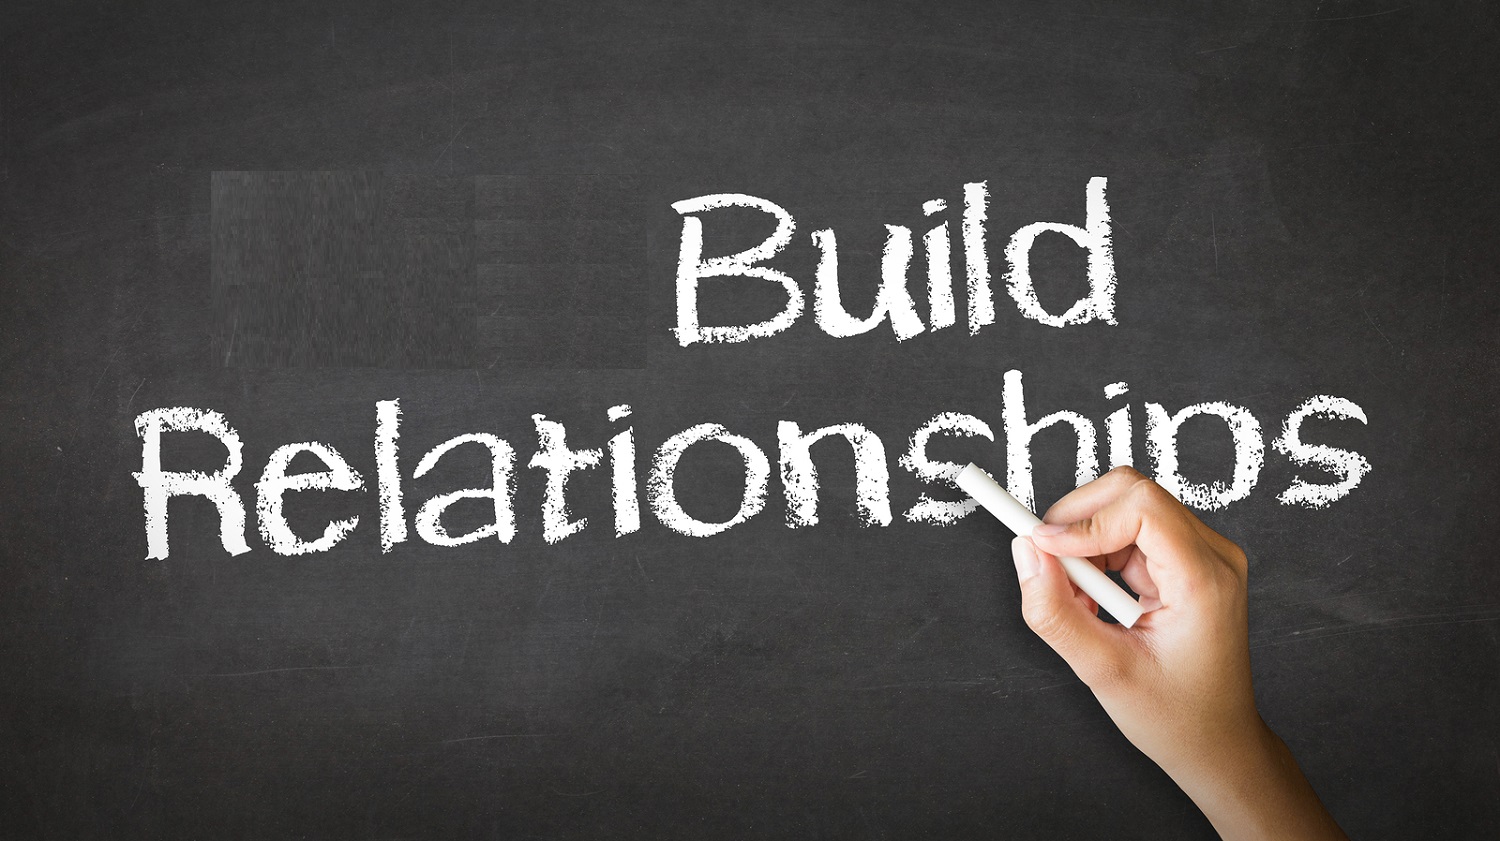 Tips for Creating Meaningful Business Relationships Online